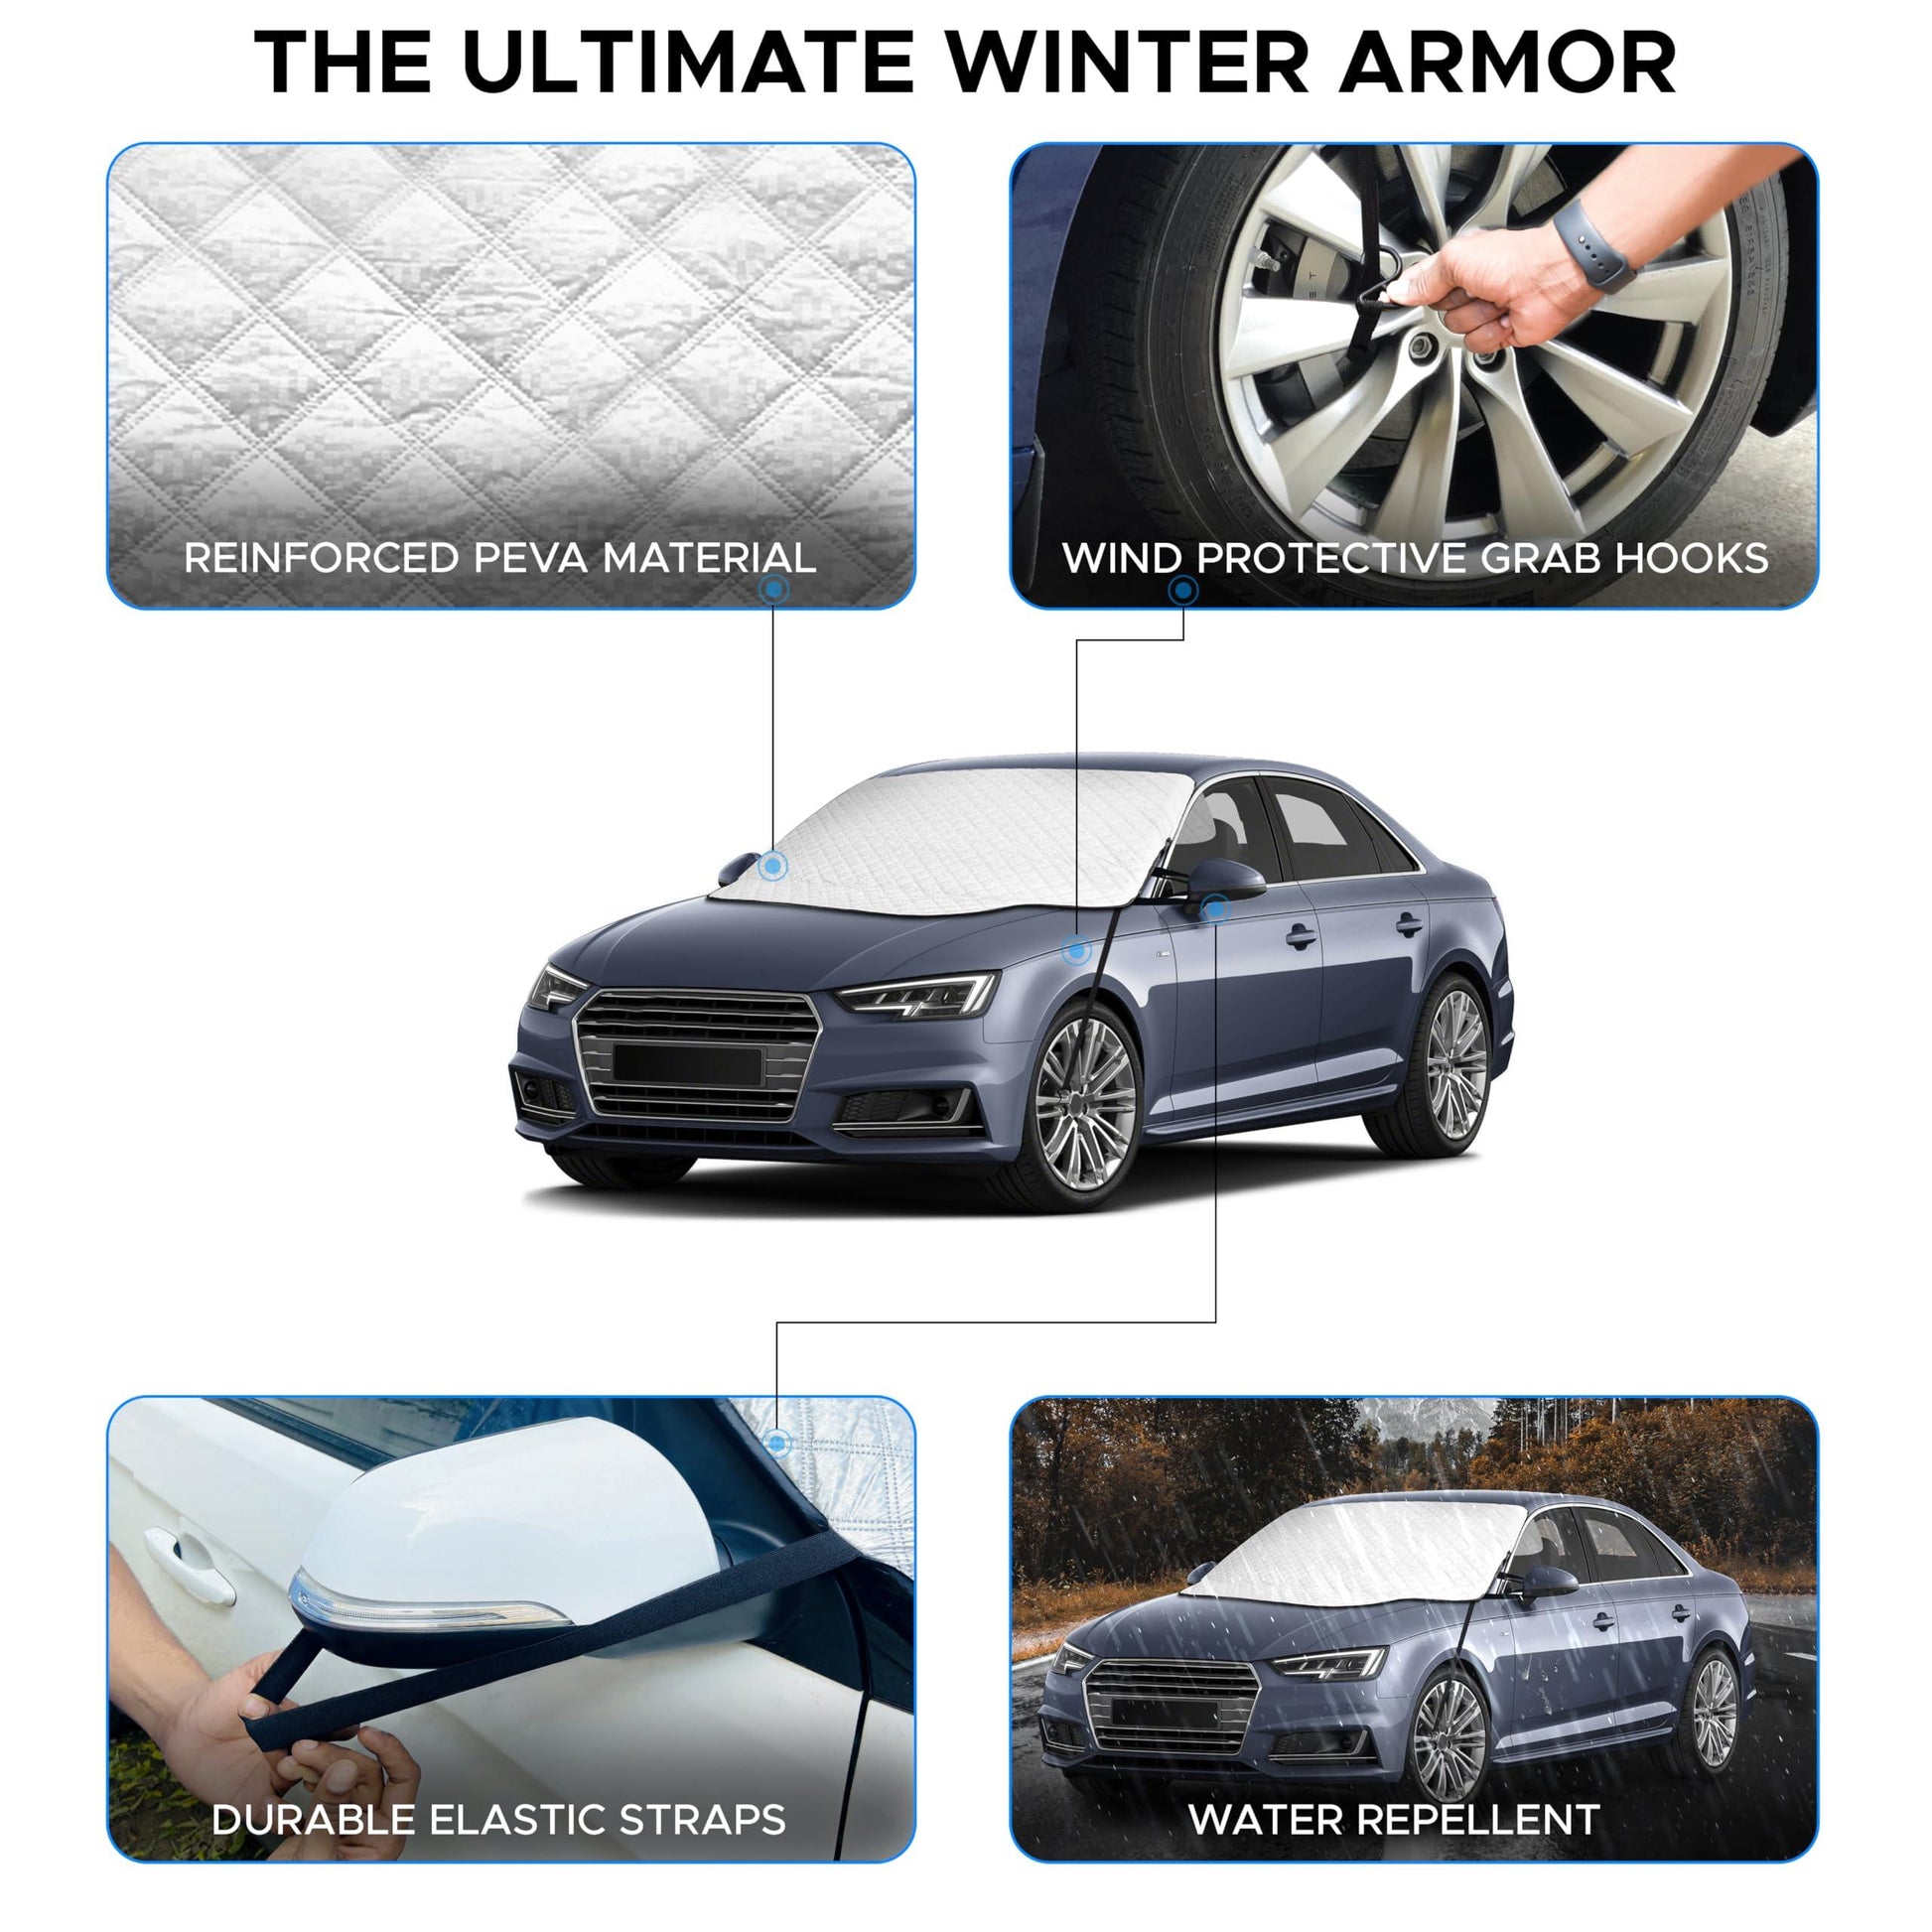  EcoNour Windshield Cover for Ice and Snow